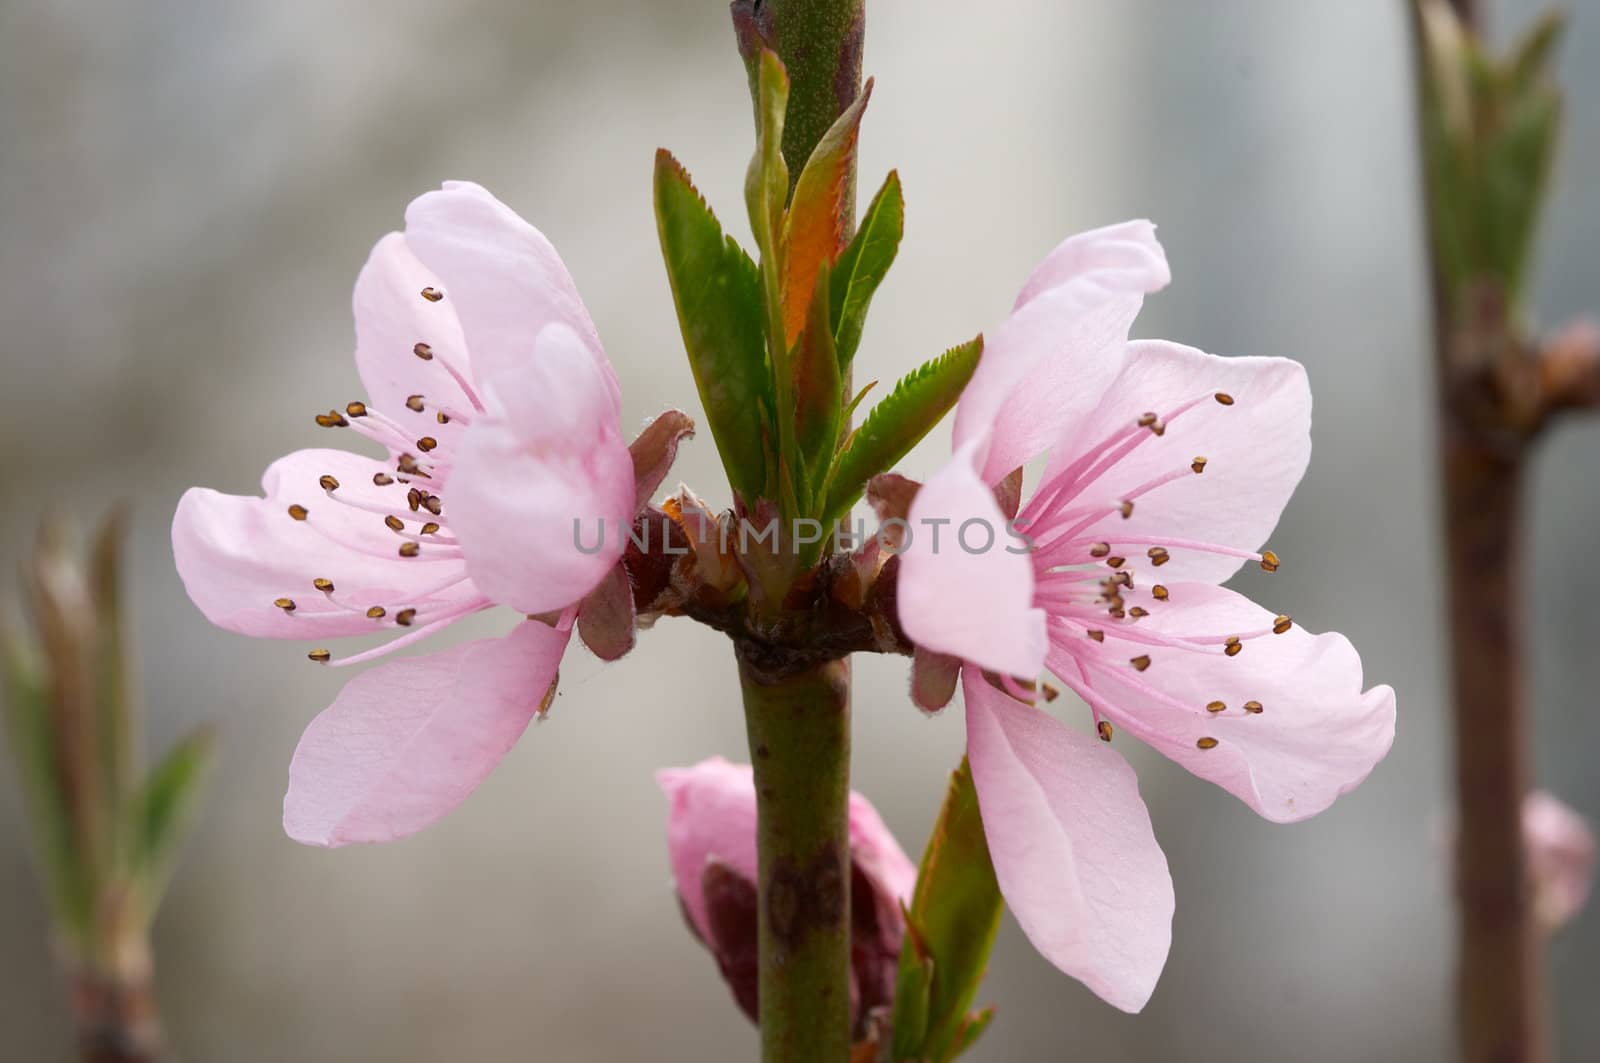 Rose colored flowers and young leaf op peach tree